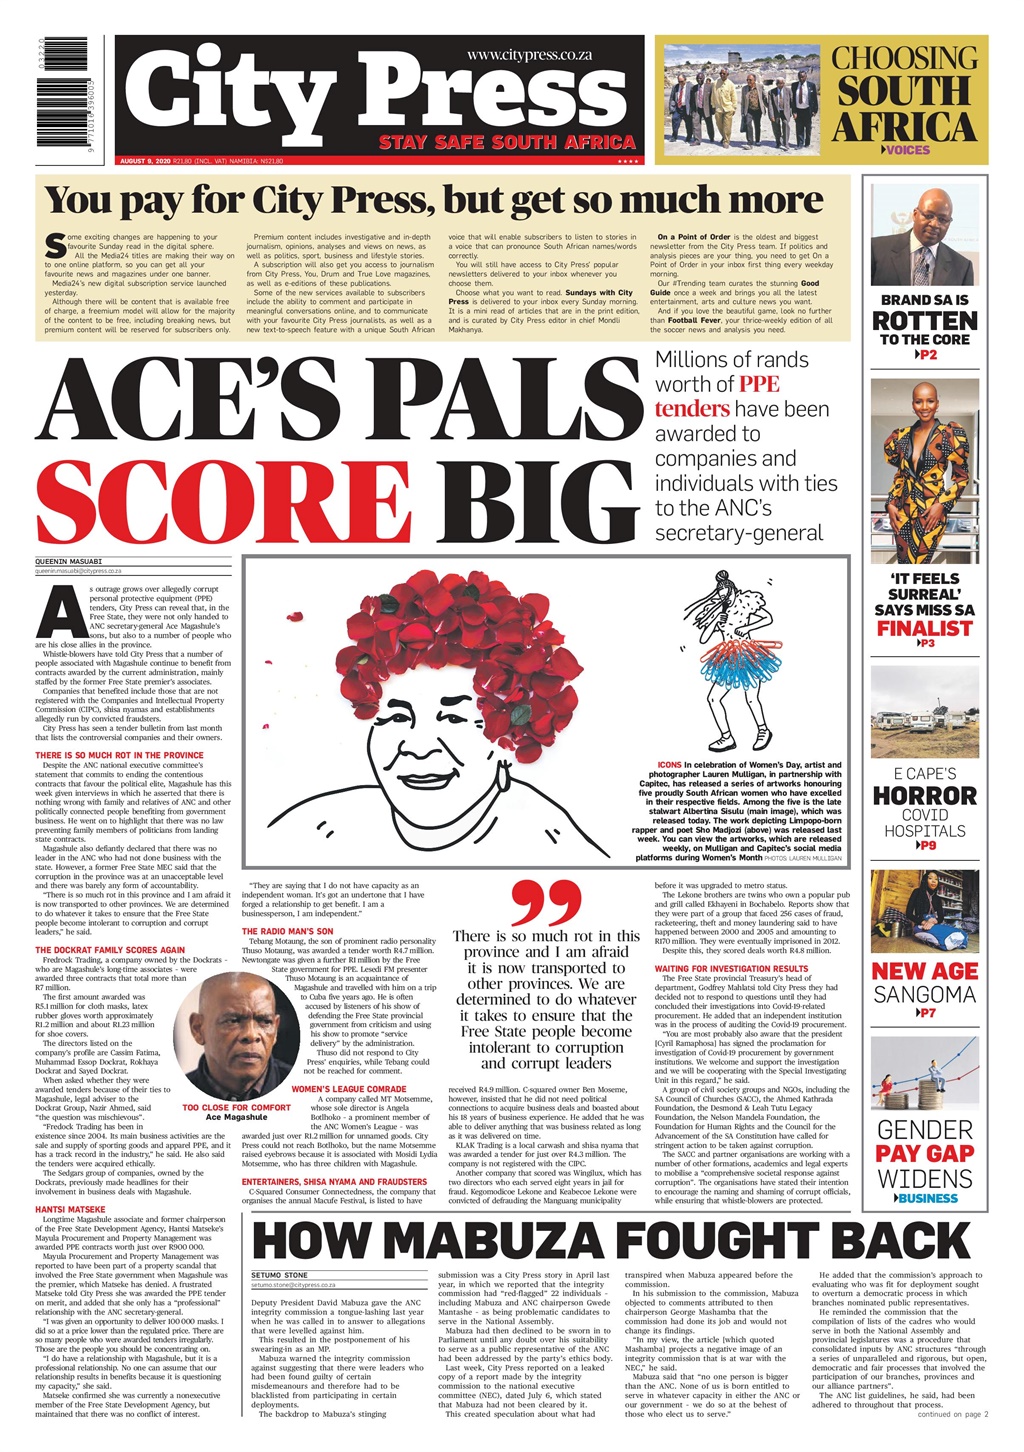 What S In City Press Ace S Pals Score Big How Mabuza Fought Back Brand Sa Is Rotten To The Core Citypress